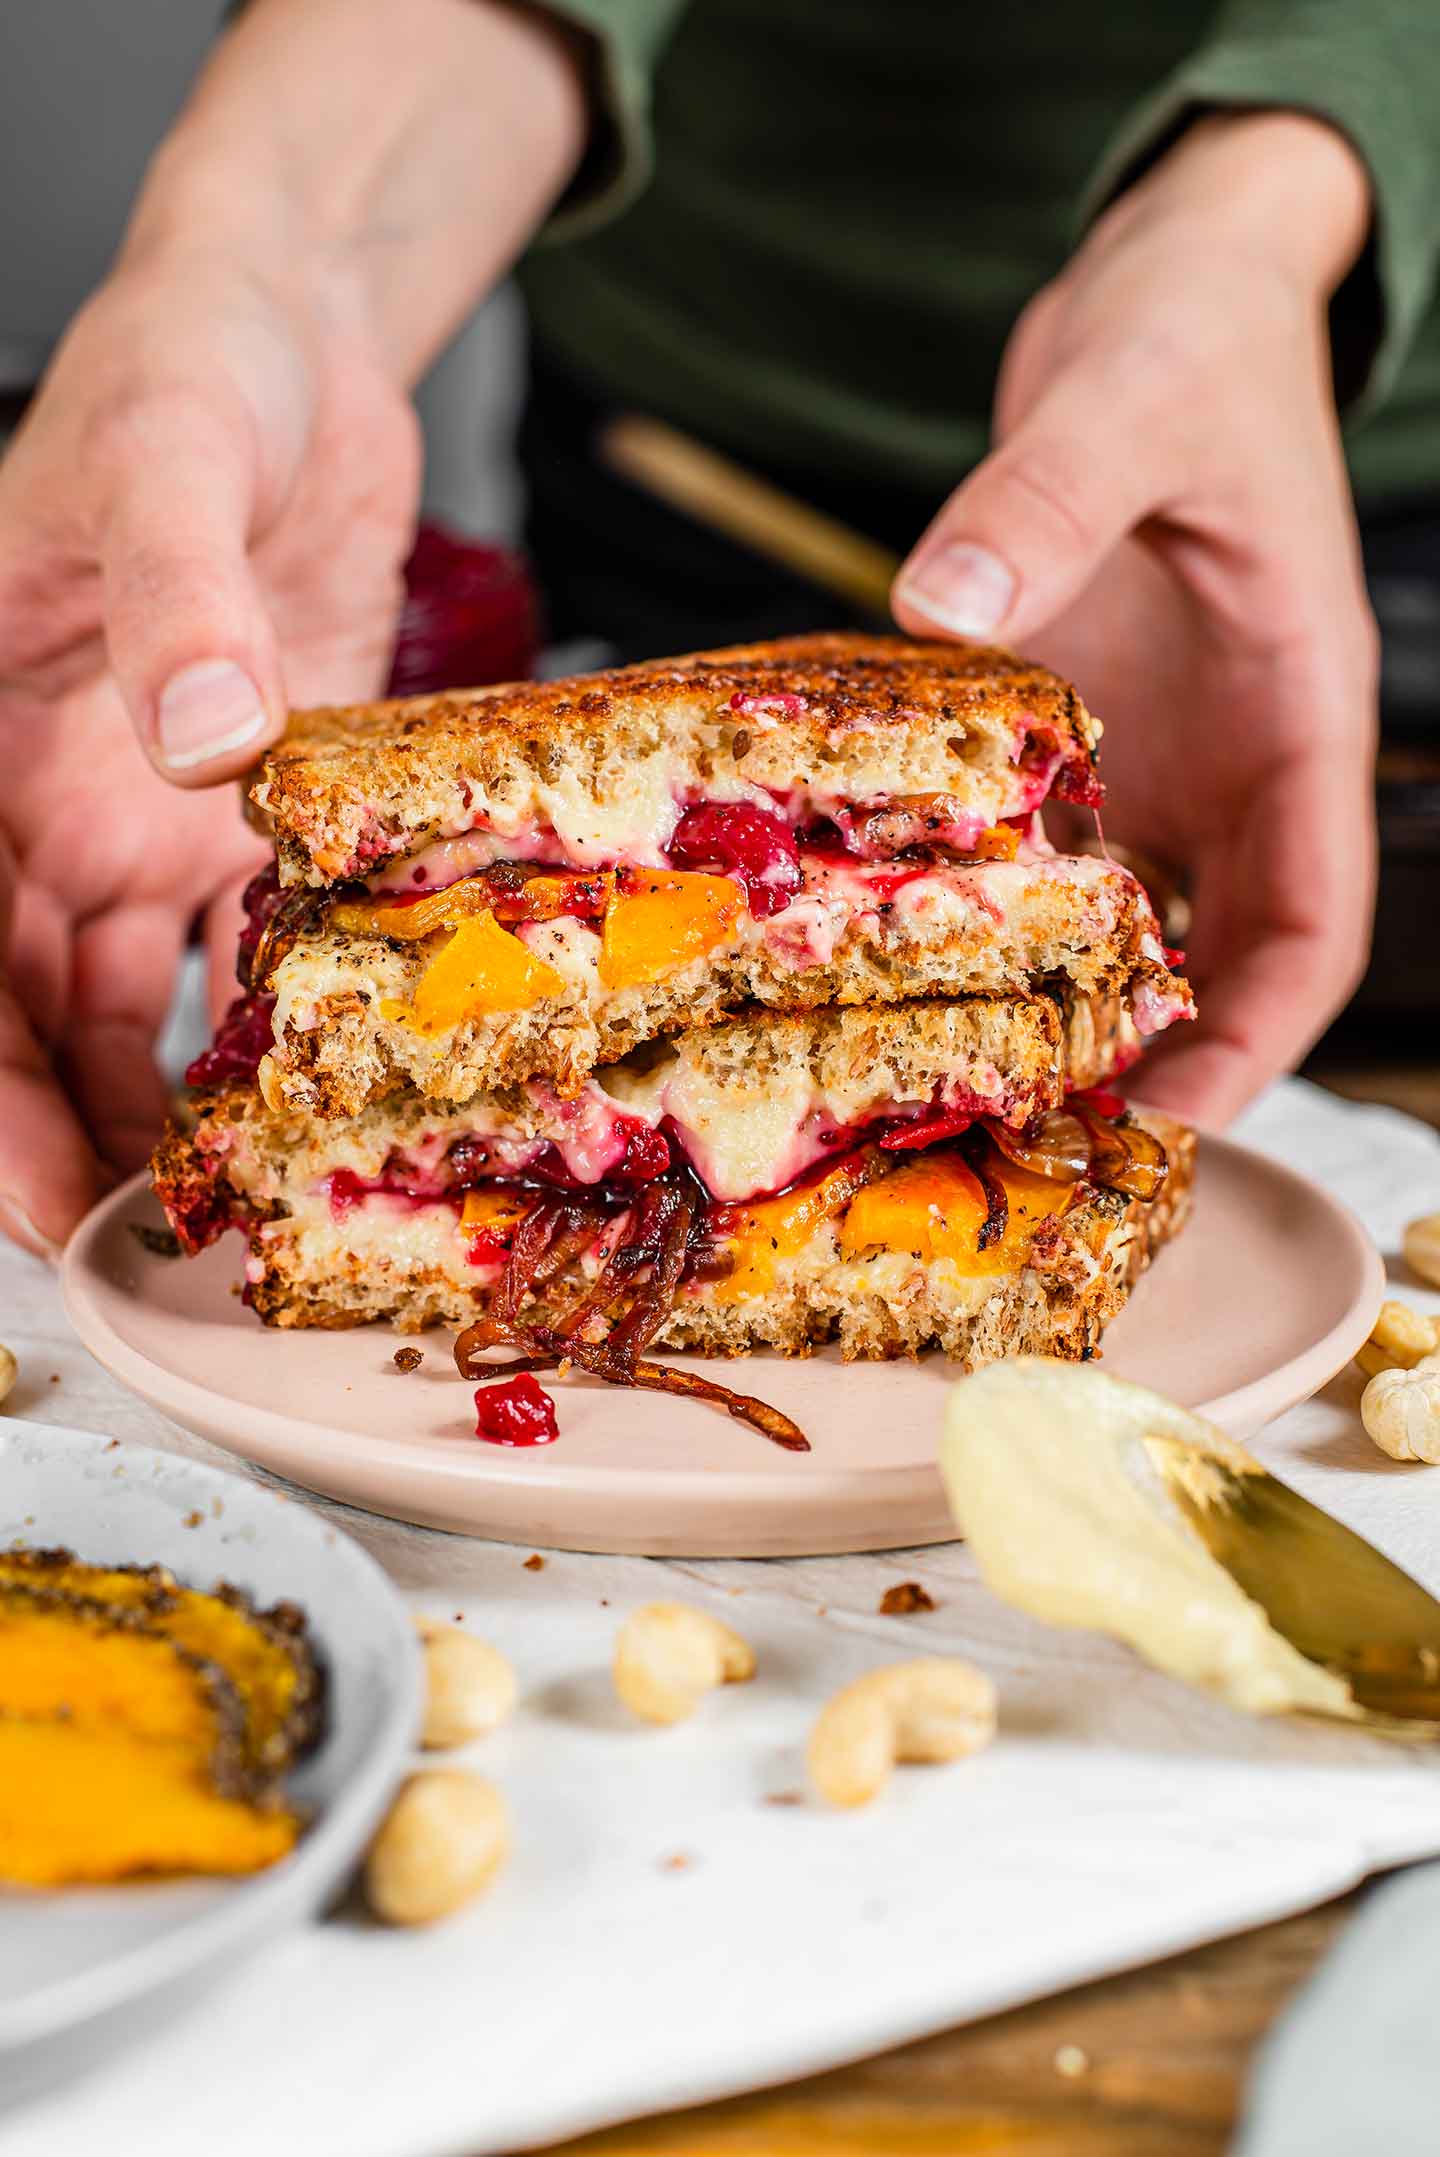 Side view of hands placing two halves of a sandwich on a plate. The sandwich is full of melty mozzarella, cranberry sauce, fried onions, and roasted squash.